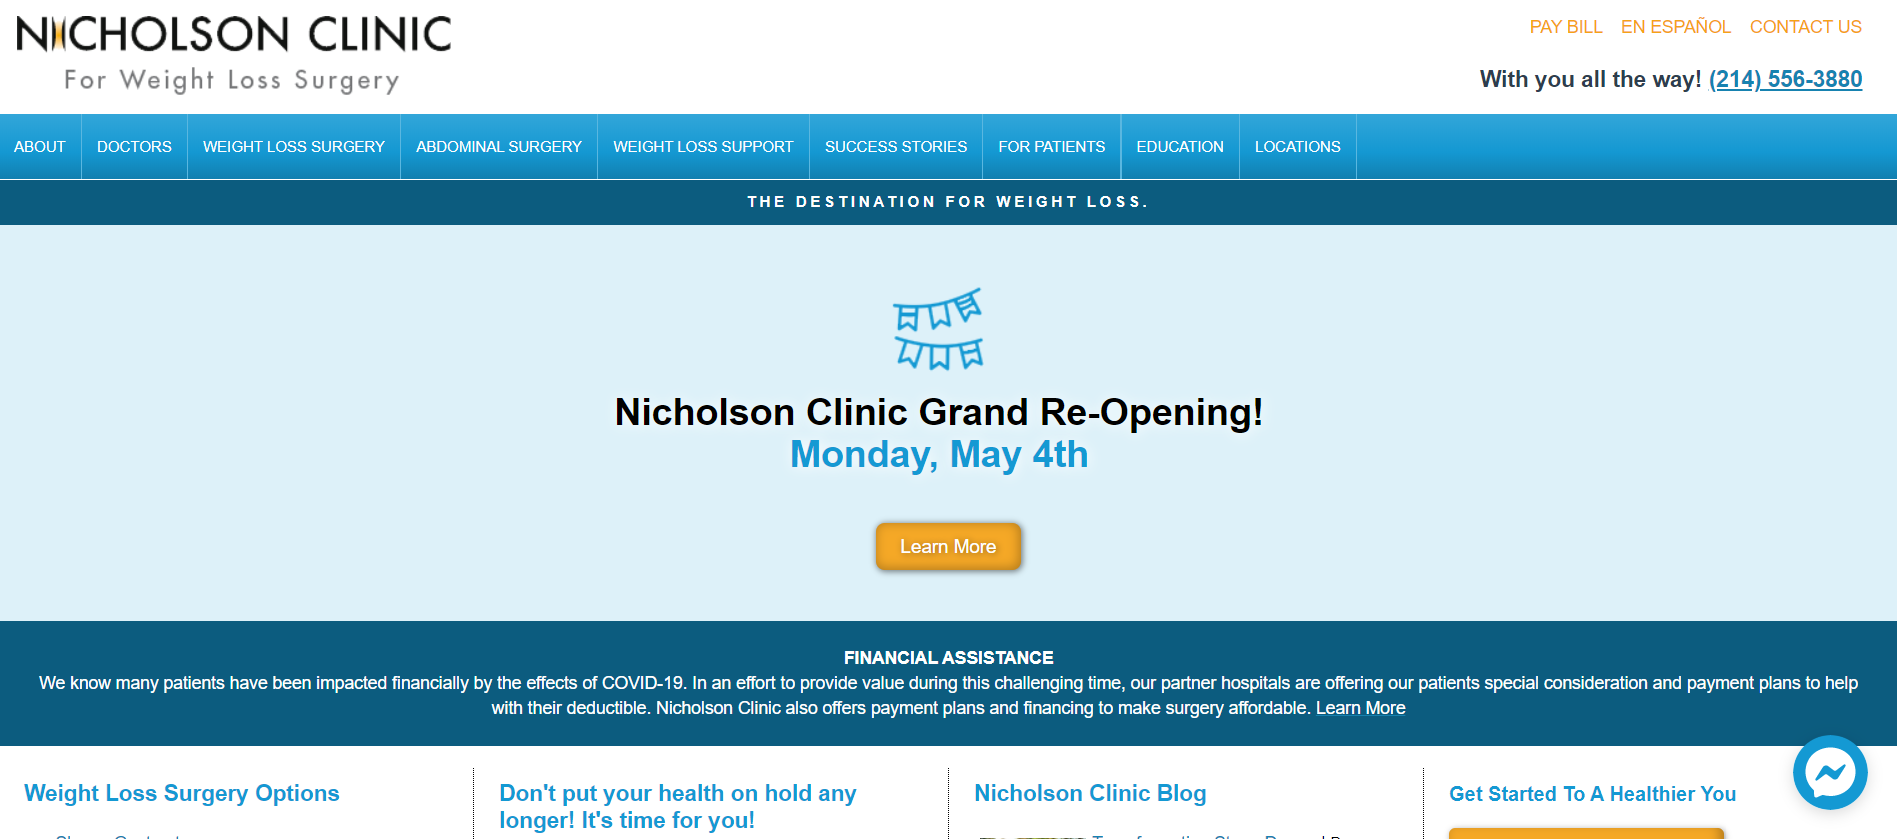 Nicholson Clinic For Weight Loss Surgery